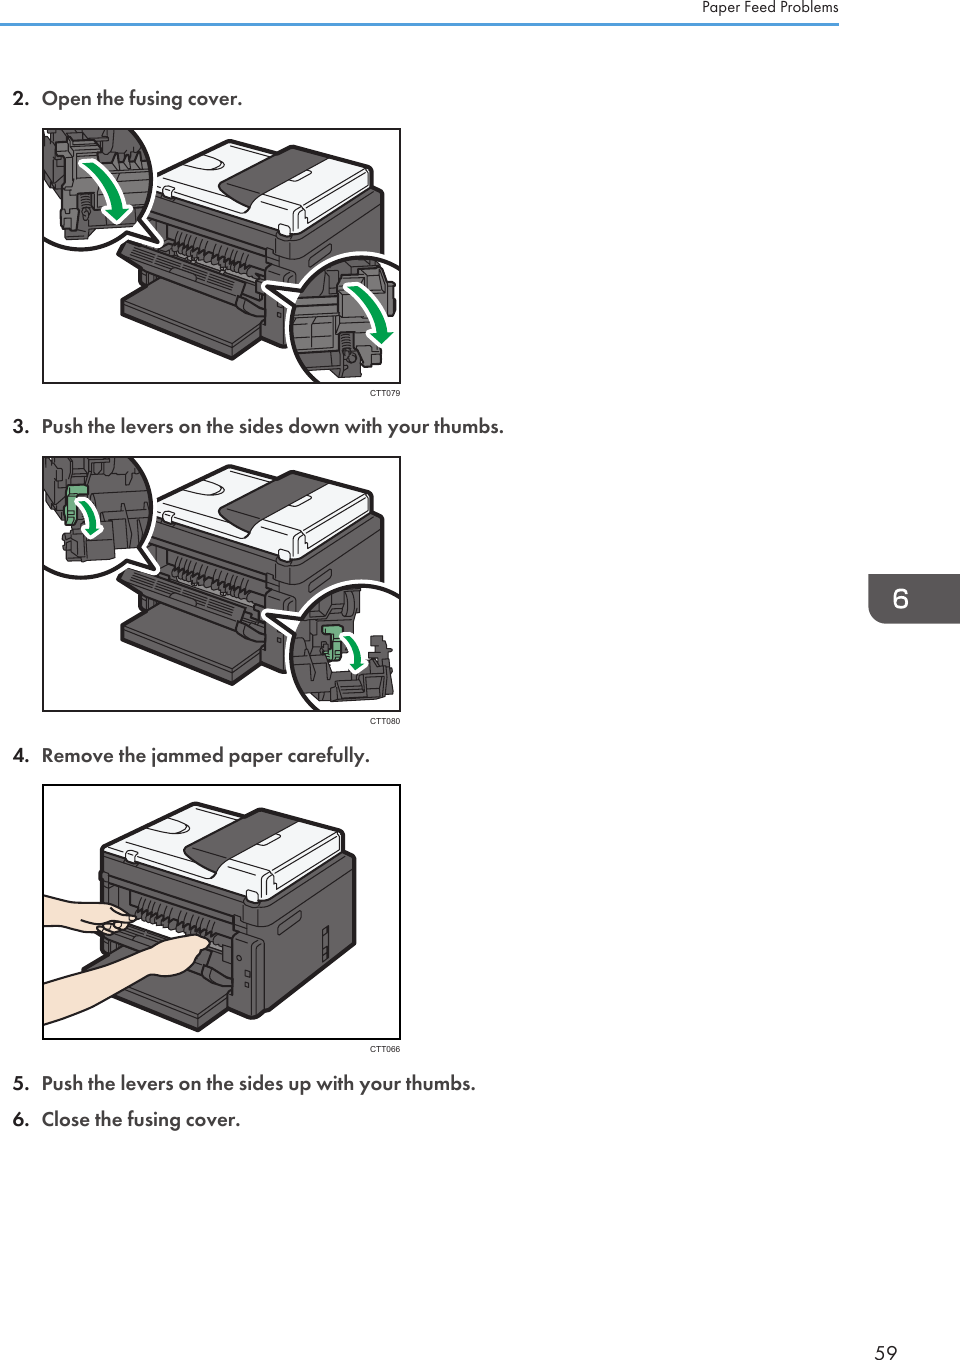 2. Open the fusing cover.CTT0793. Push the levers on the sides down with your thumbs.CTT0804. Remove the jammed paper carefully.CTT0665. Push the levers on the sides up with your thumbs.6. Close the fusing cover.Paper Feed Problems59